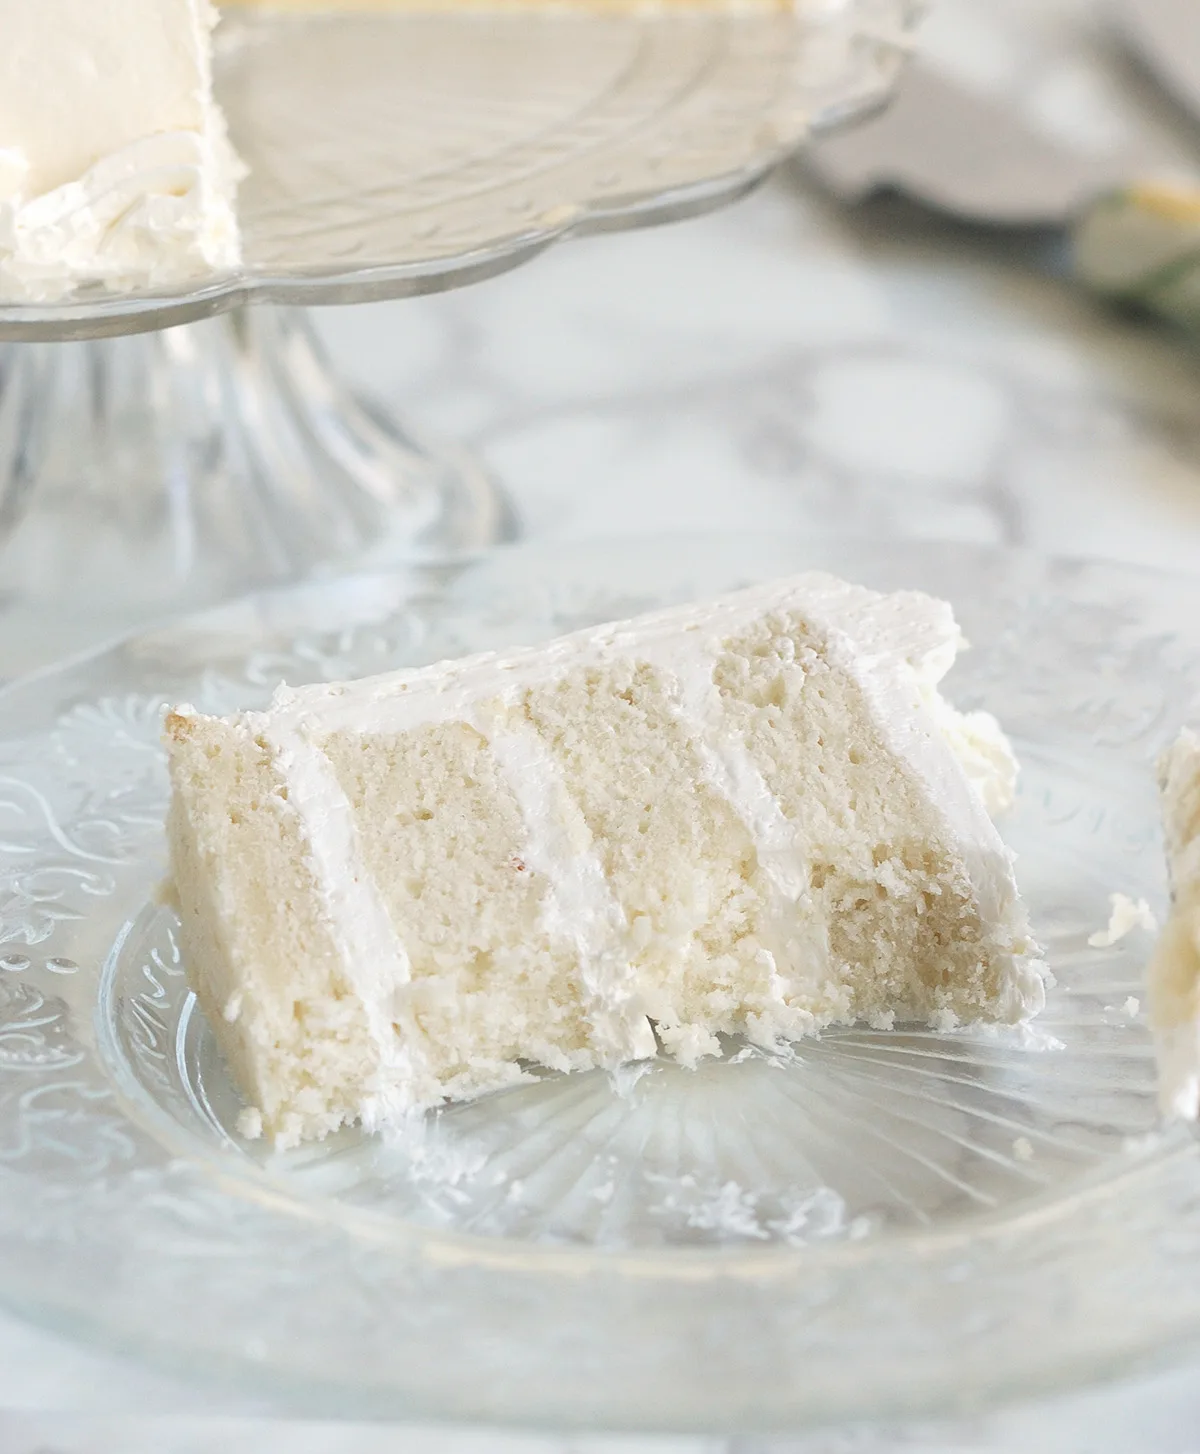 A half-eaten slice of four layer velvety soft white cake on a glass plate